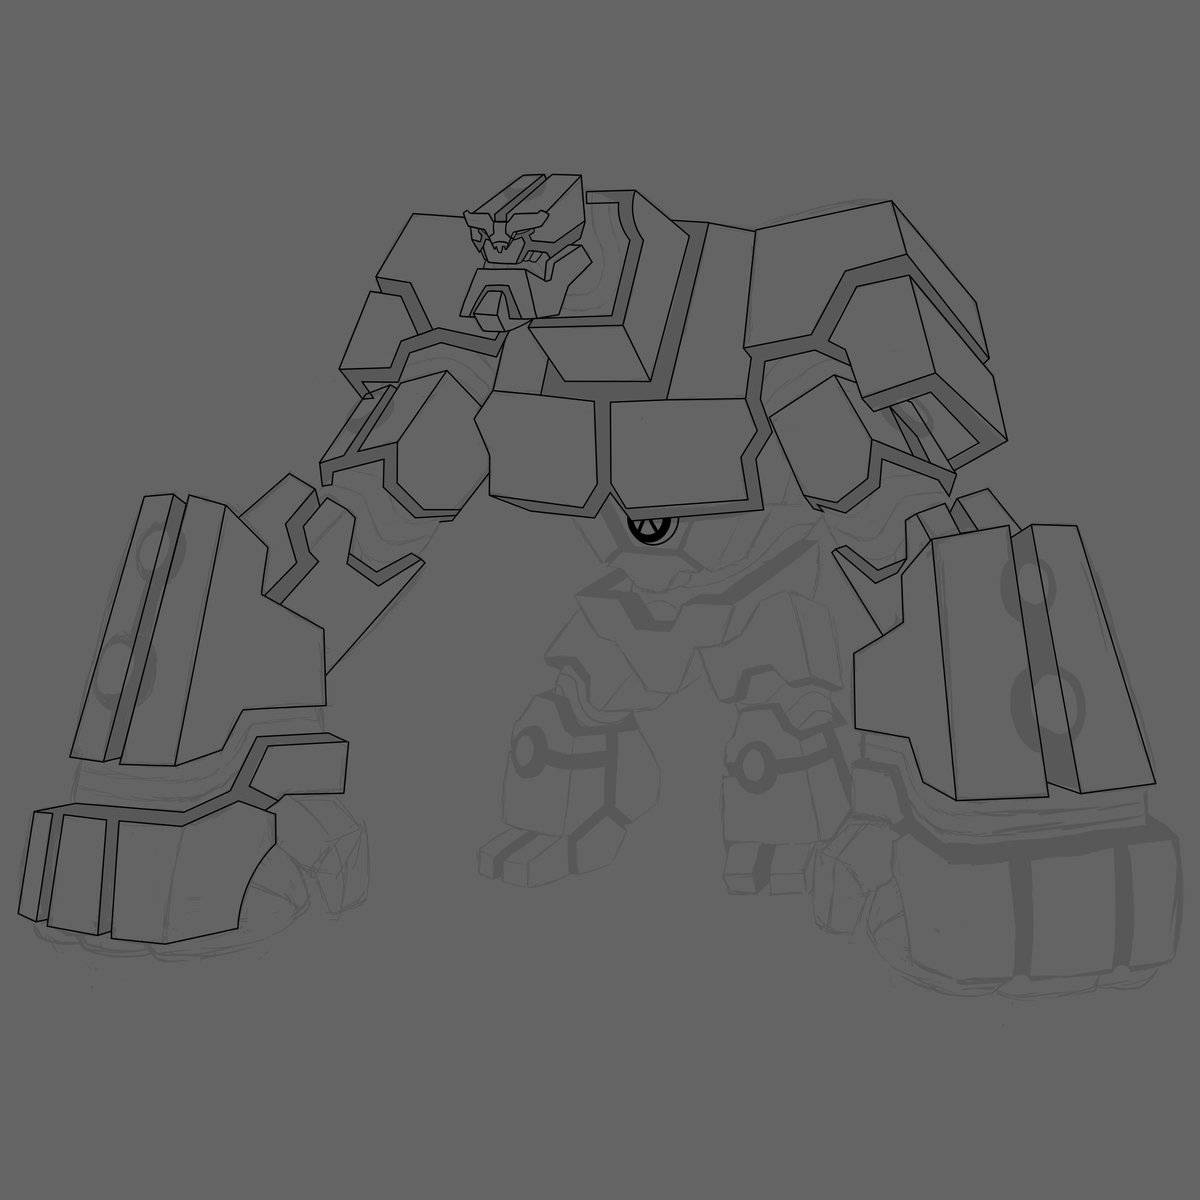 Bloxx so far working on all the geometrical parts than after that will do the hands and the in-between of the segments whit just the regular brush tool